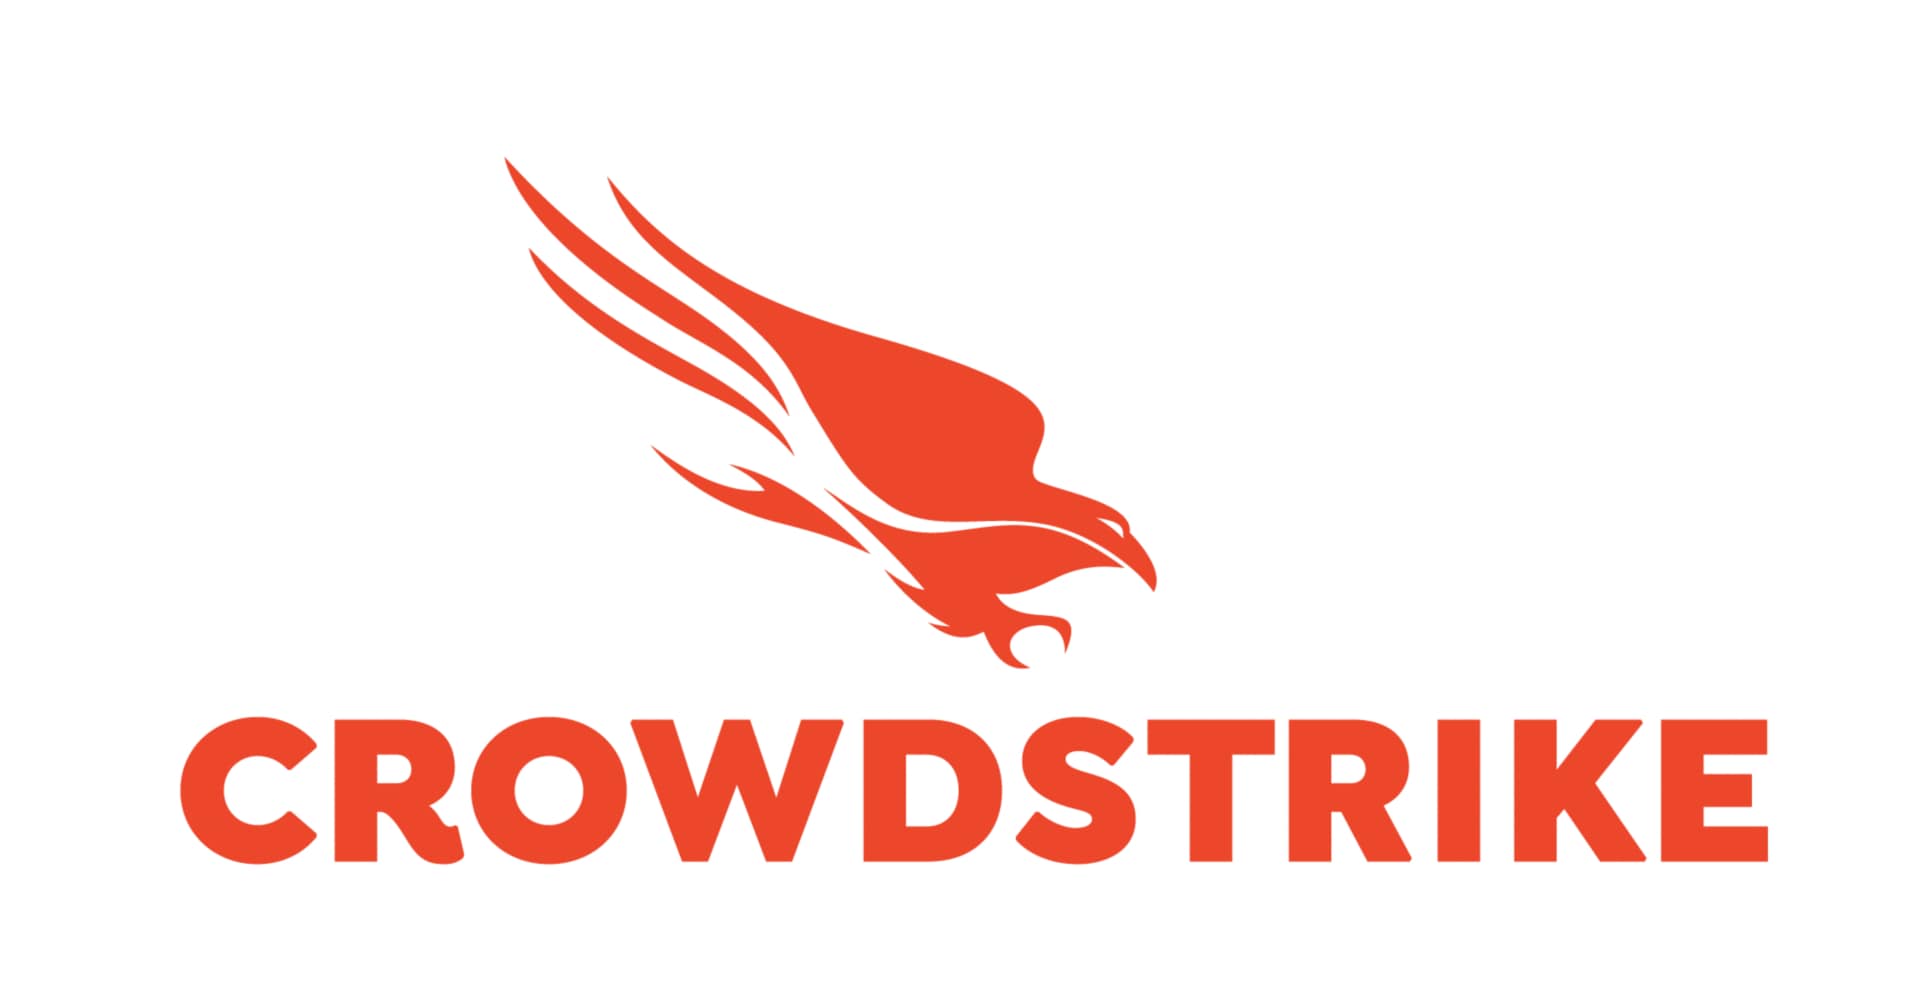 CrowdStrike 12-Month Falcon Identity Threat Detection Software Subscription